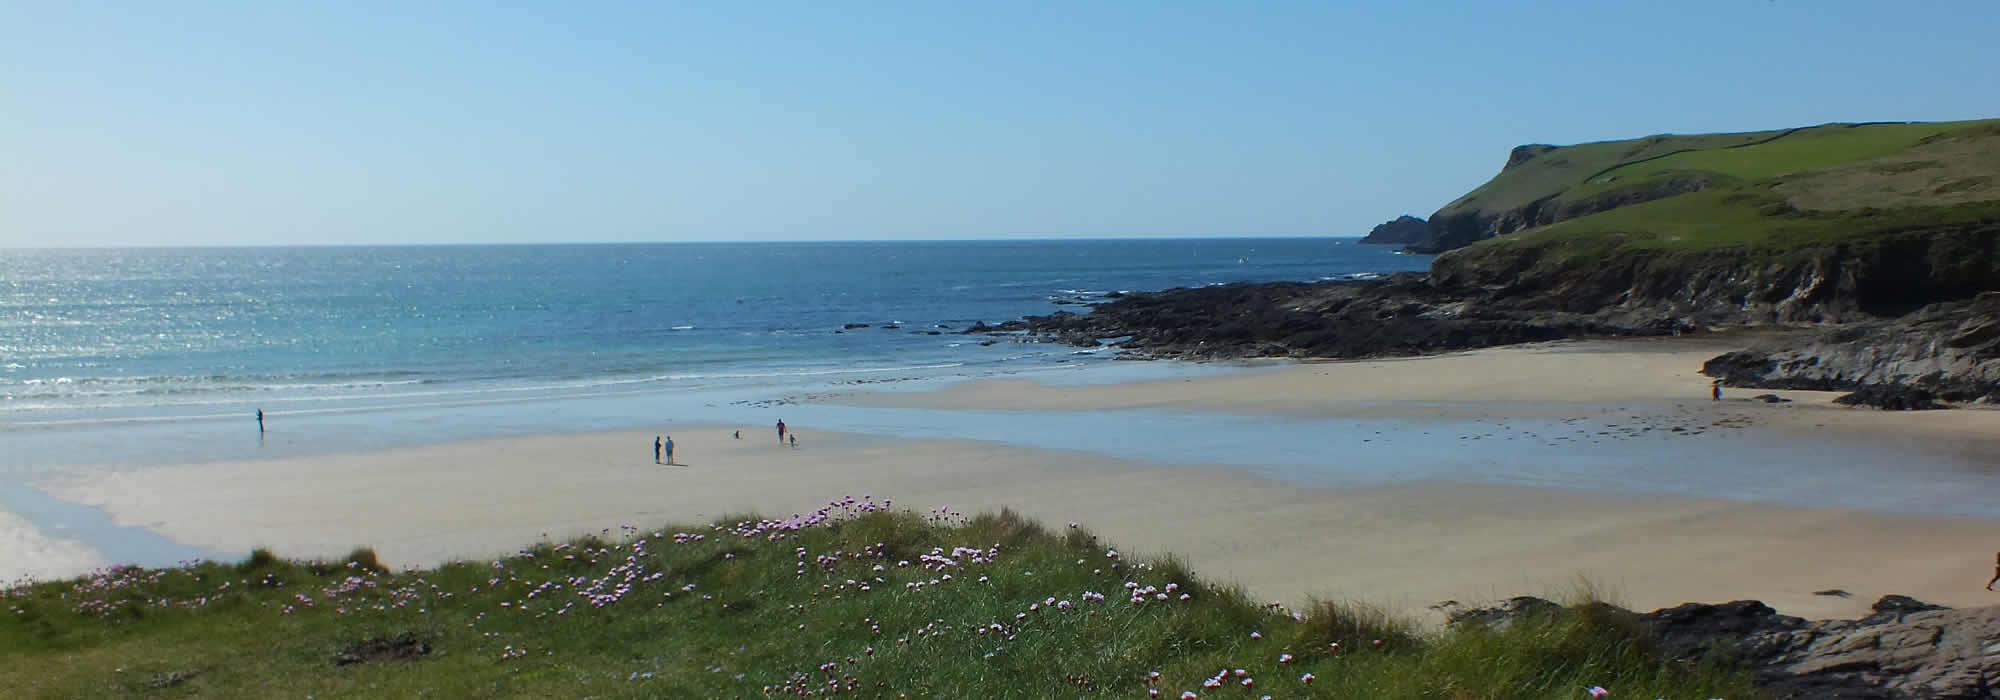 The popular family and surfing beach of Polzeath on the north coast of Cornwall